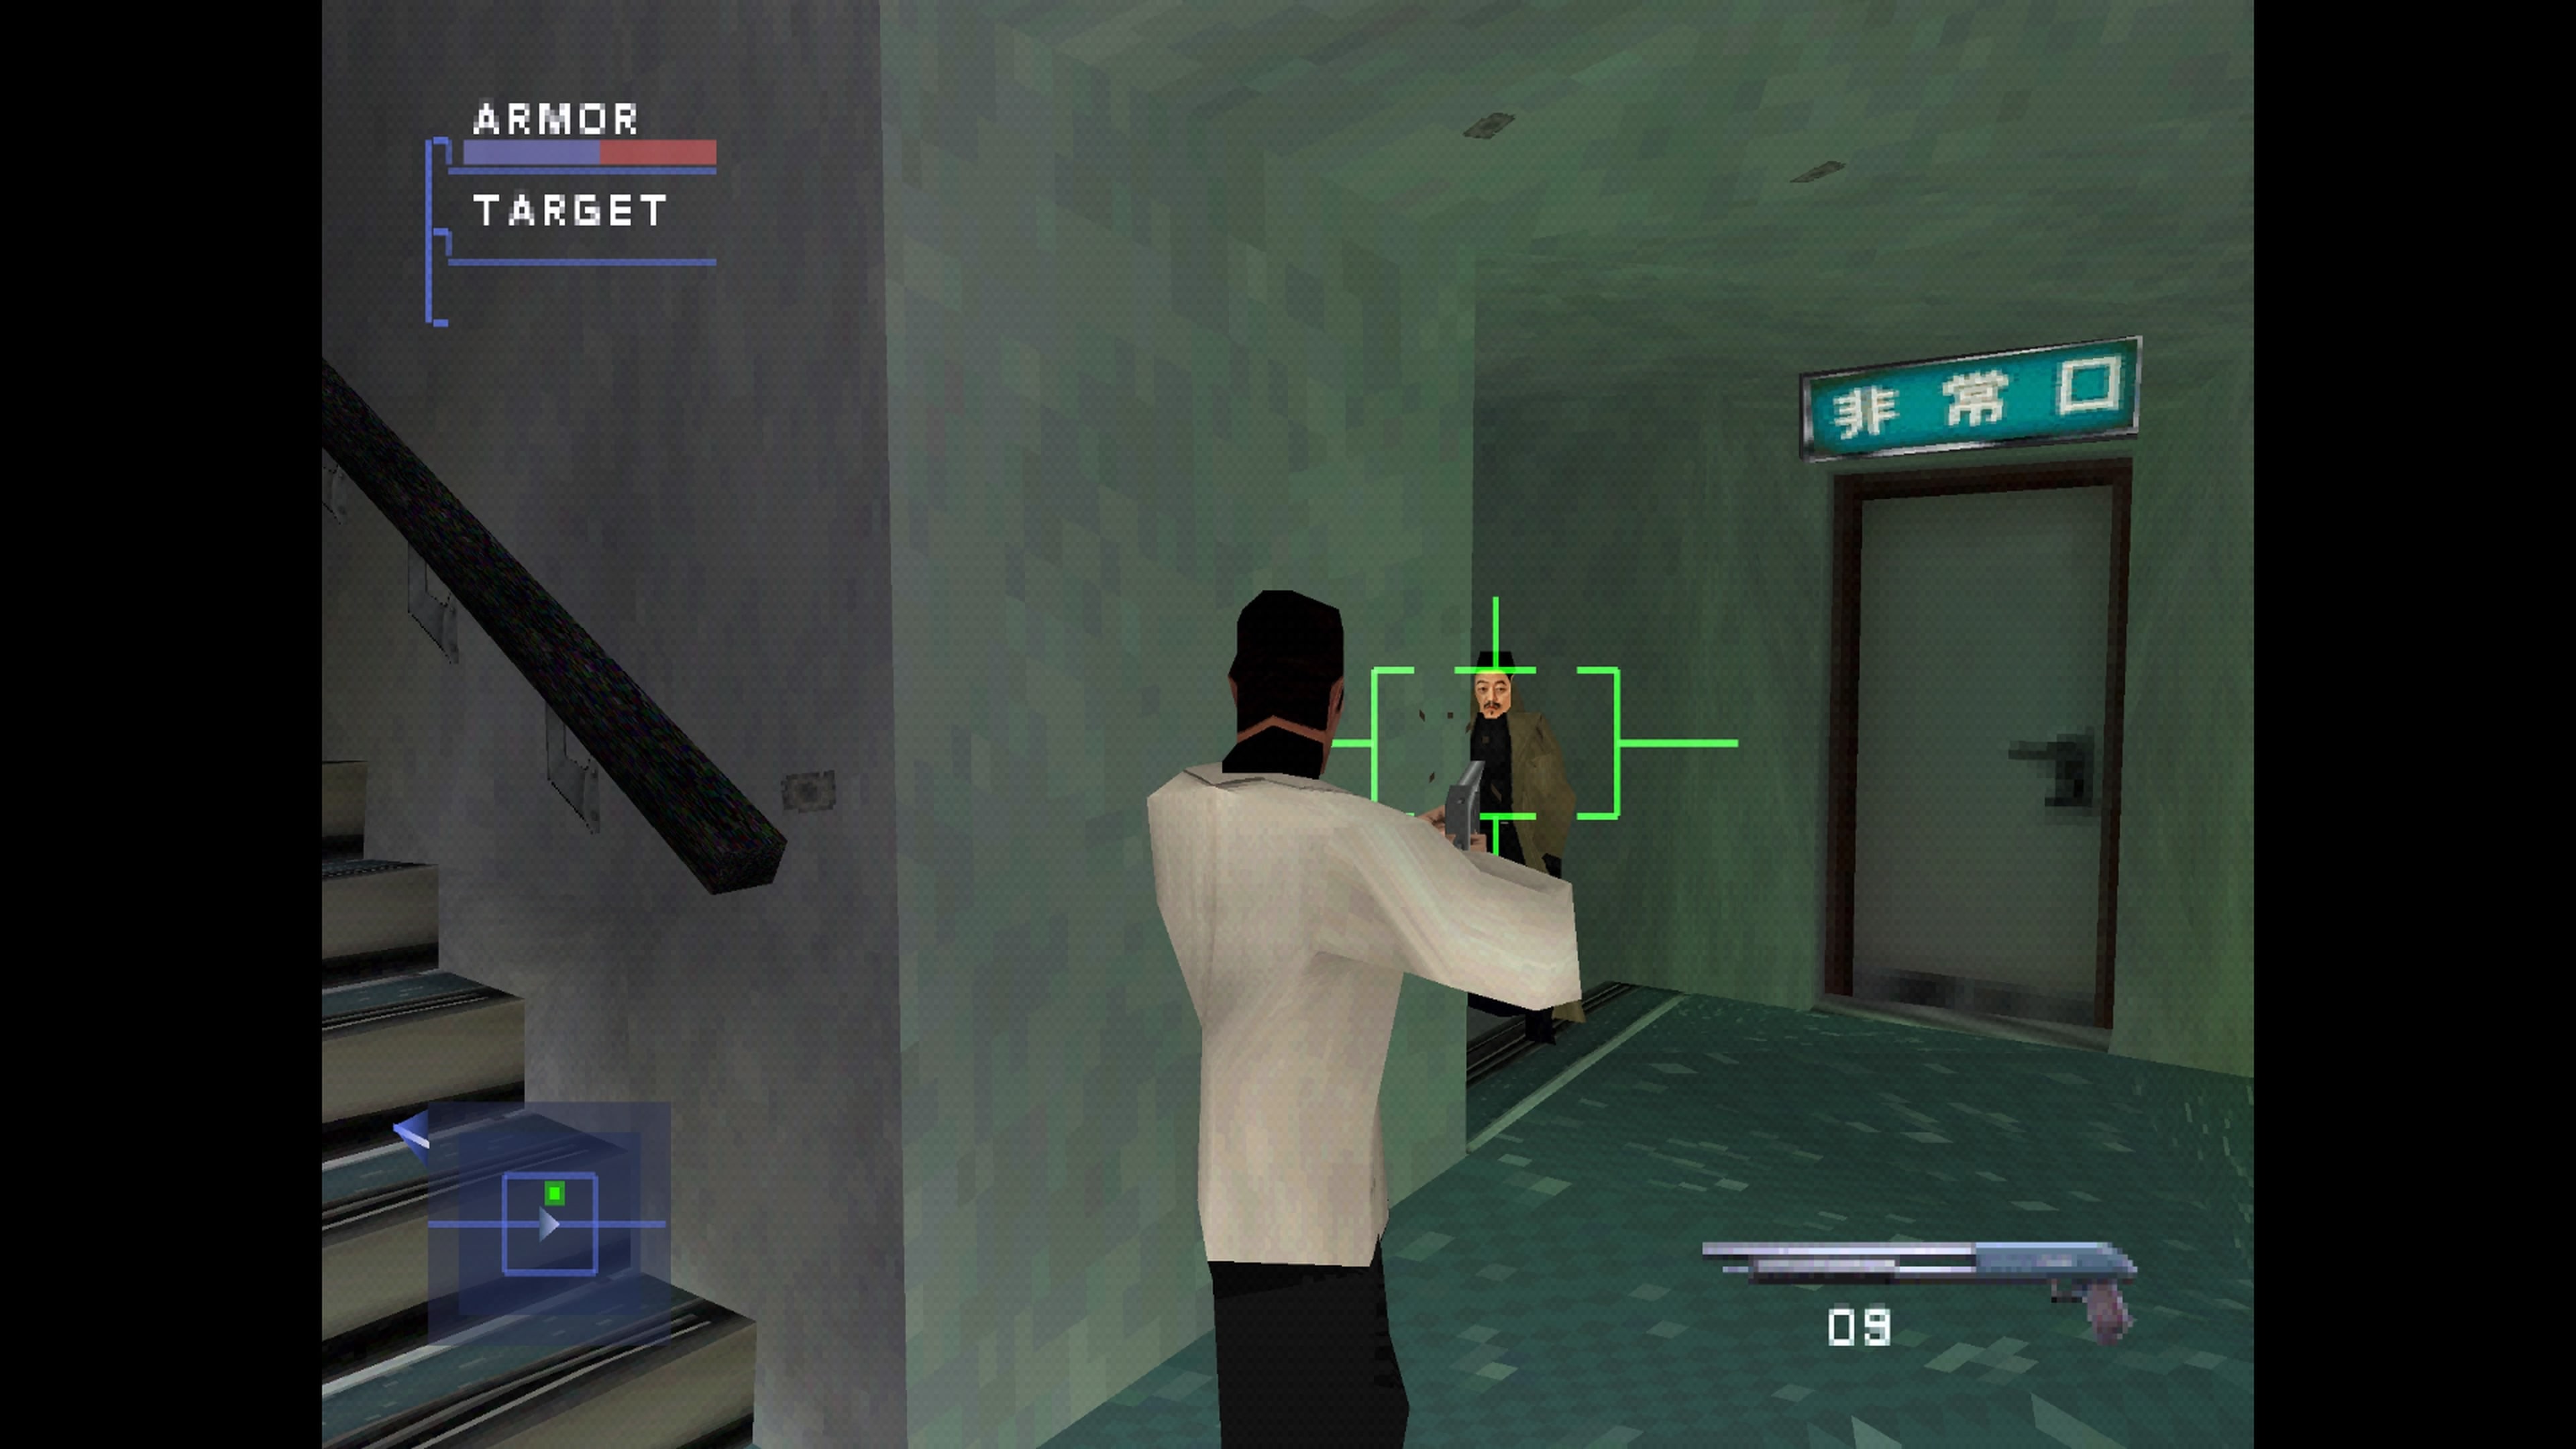 Syphon Filter 3 on PS5 PS4 — price history, screenshots, discounts